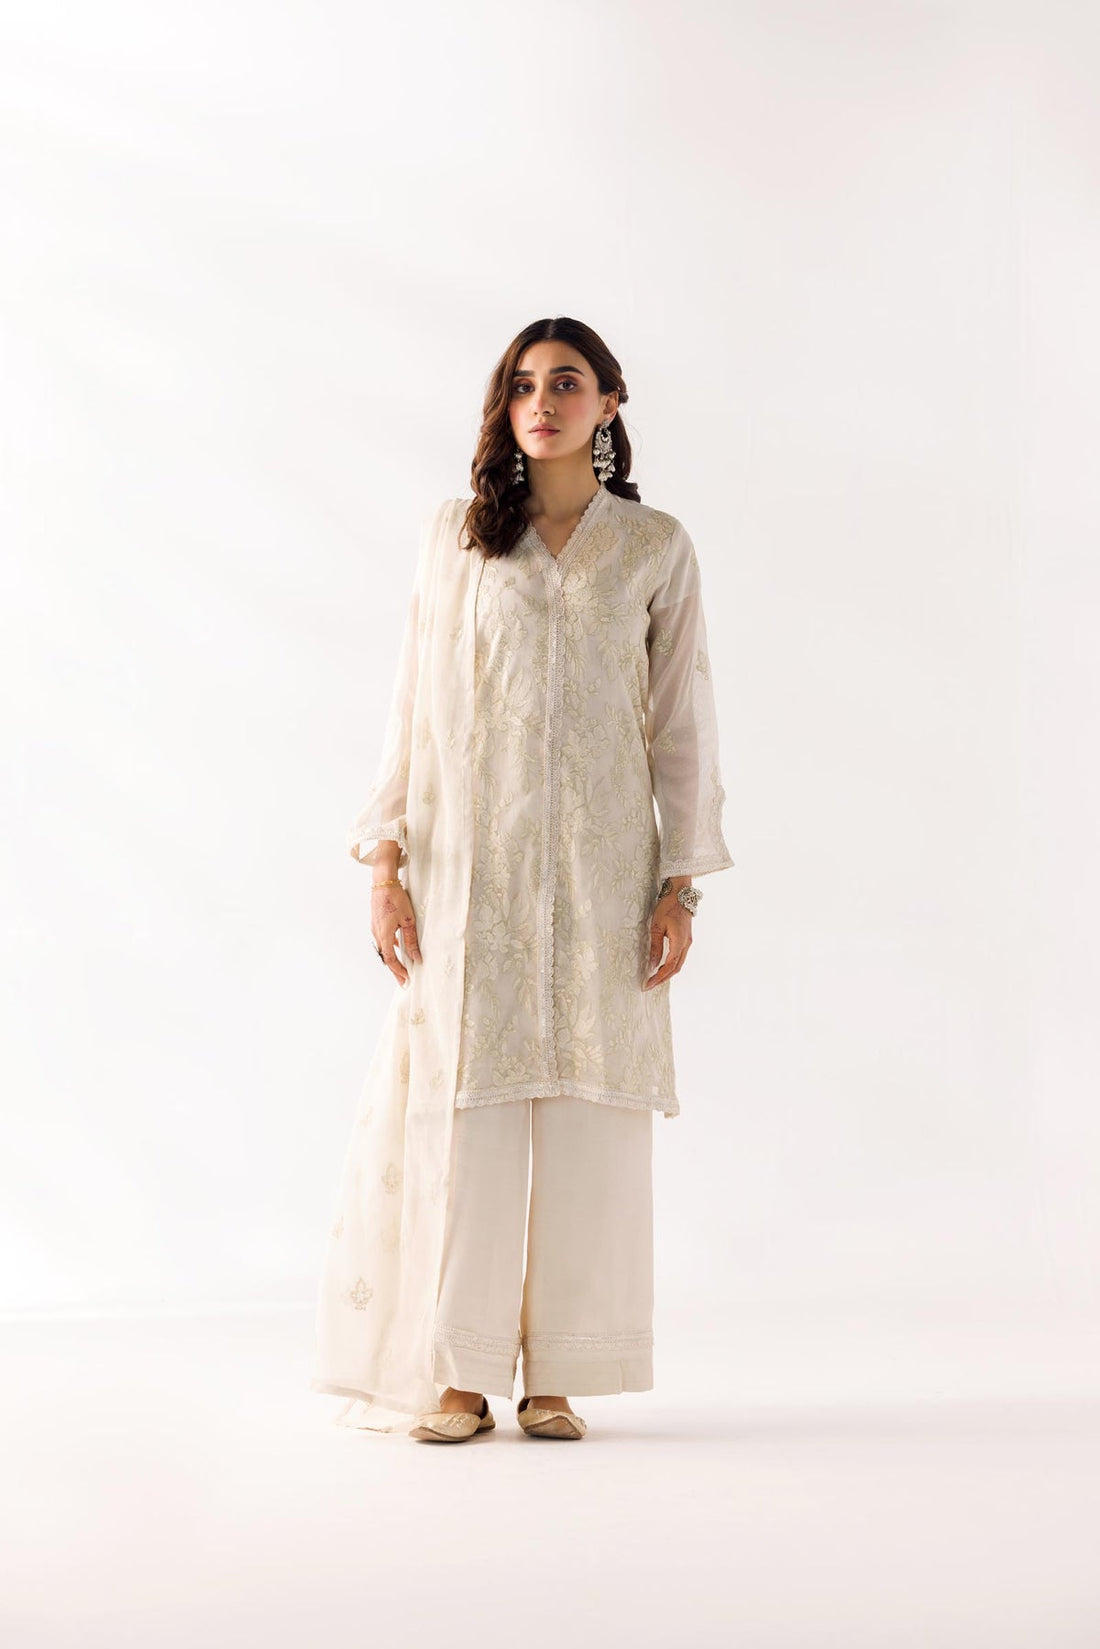 TaanaBaana | Luxe Line | F0386A - Khanumjan  Pakistani Clothes and Designer Dresses in UK, USA 